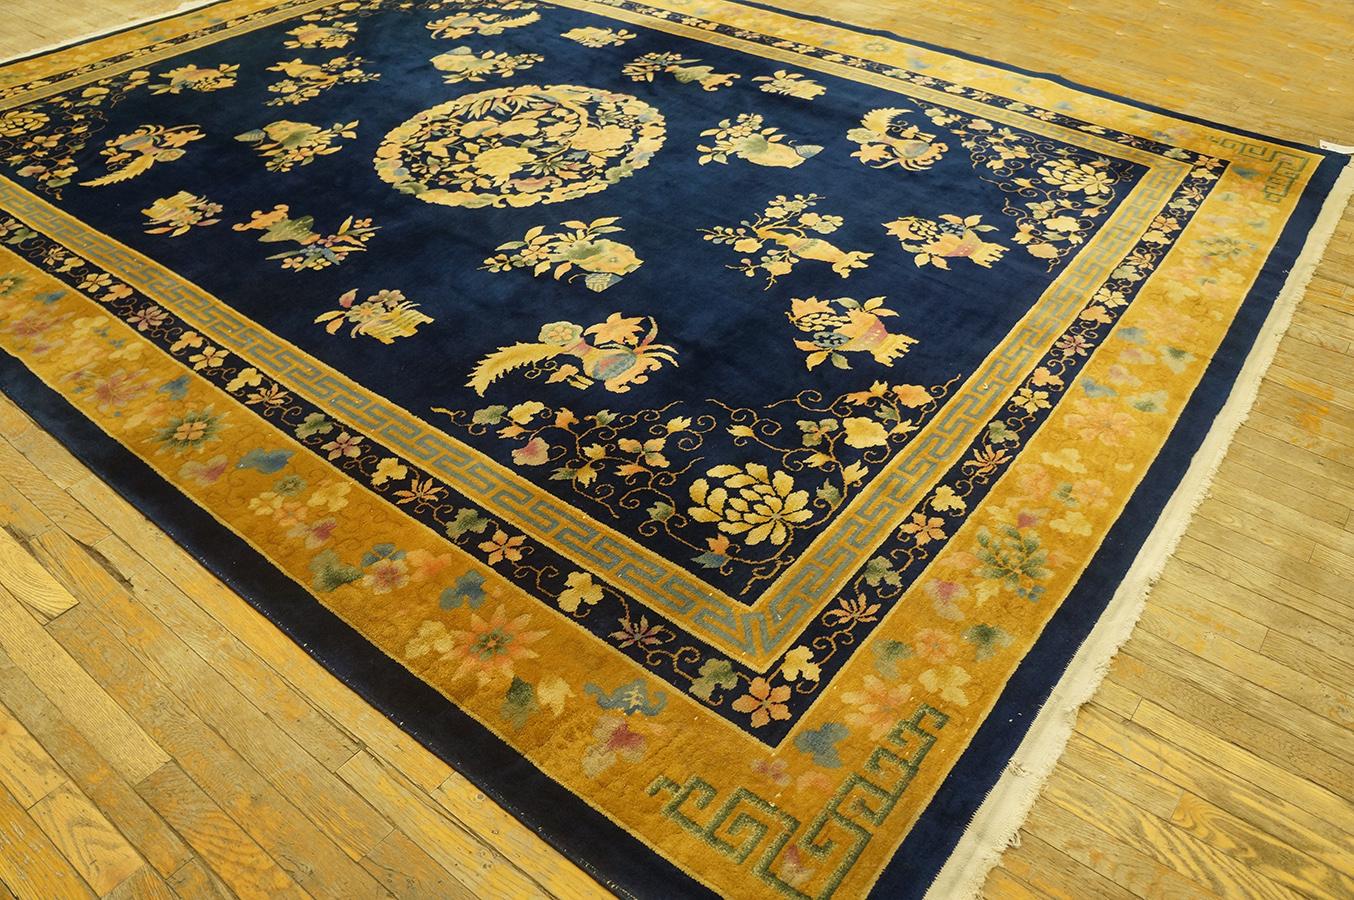 1920s Chinese Art Deco Carpet ( 8' 9'' x 11' 6'' - 266 x 350 cm ) In Good Condition For Sale In New York, NY